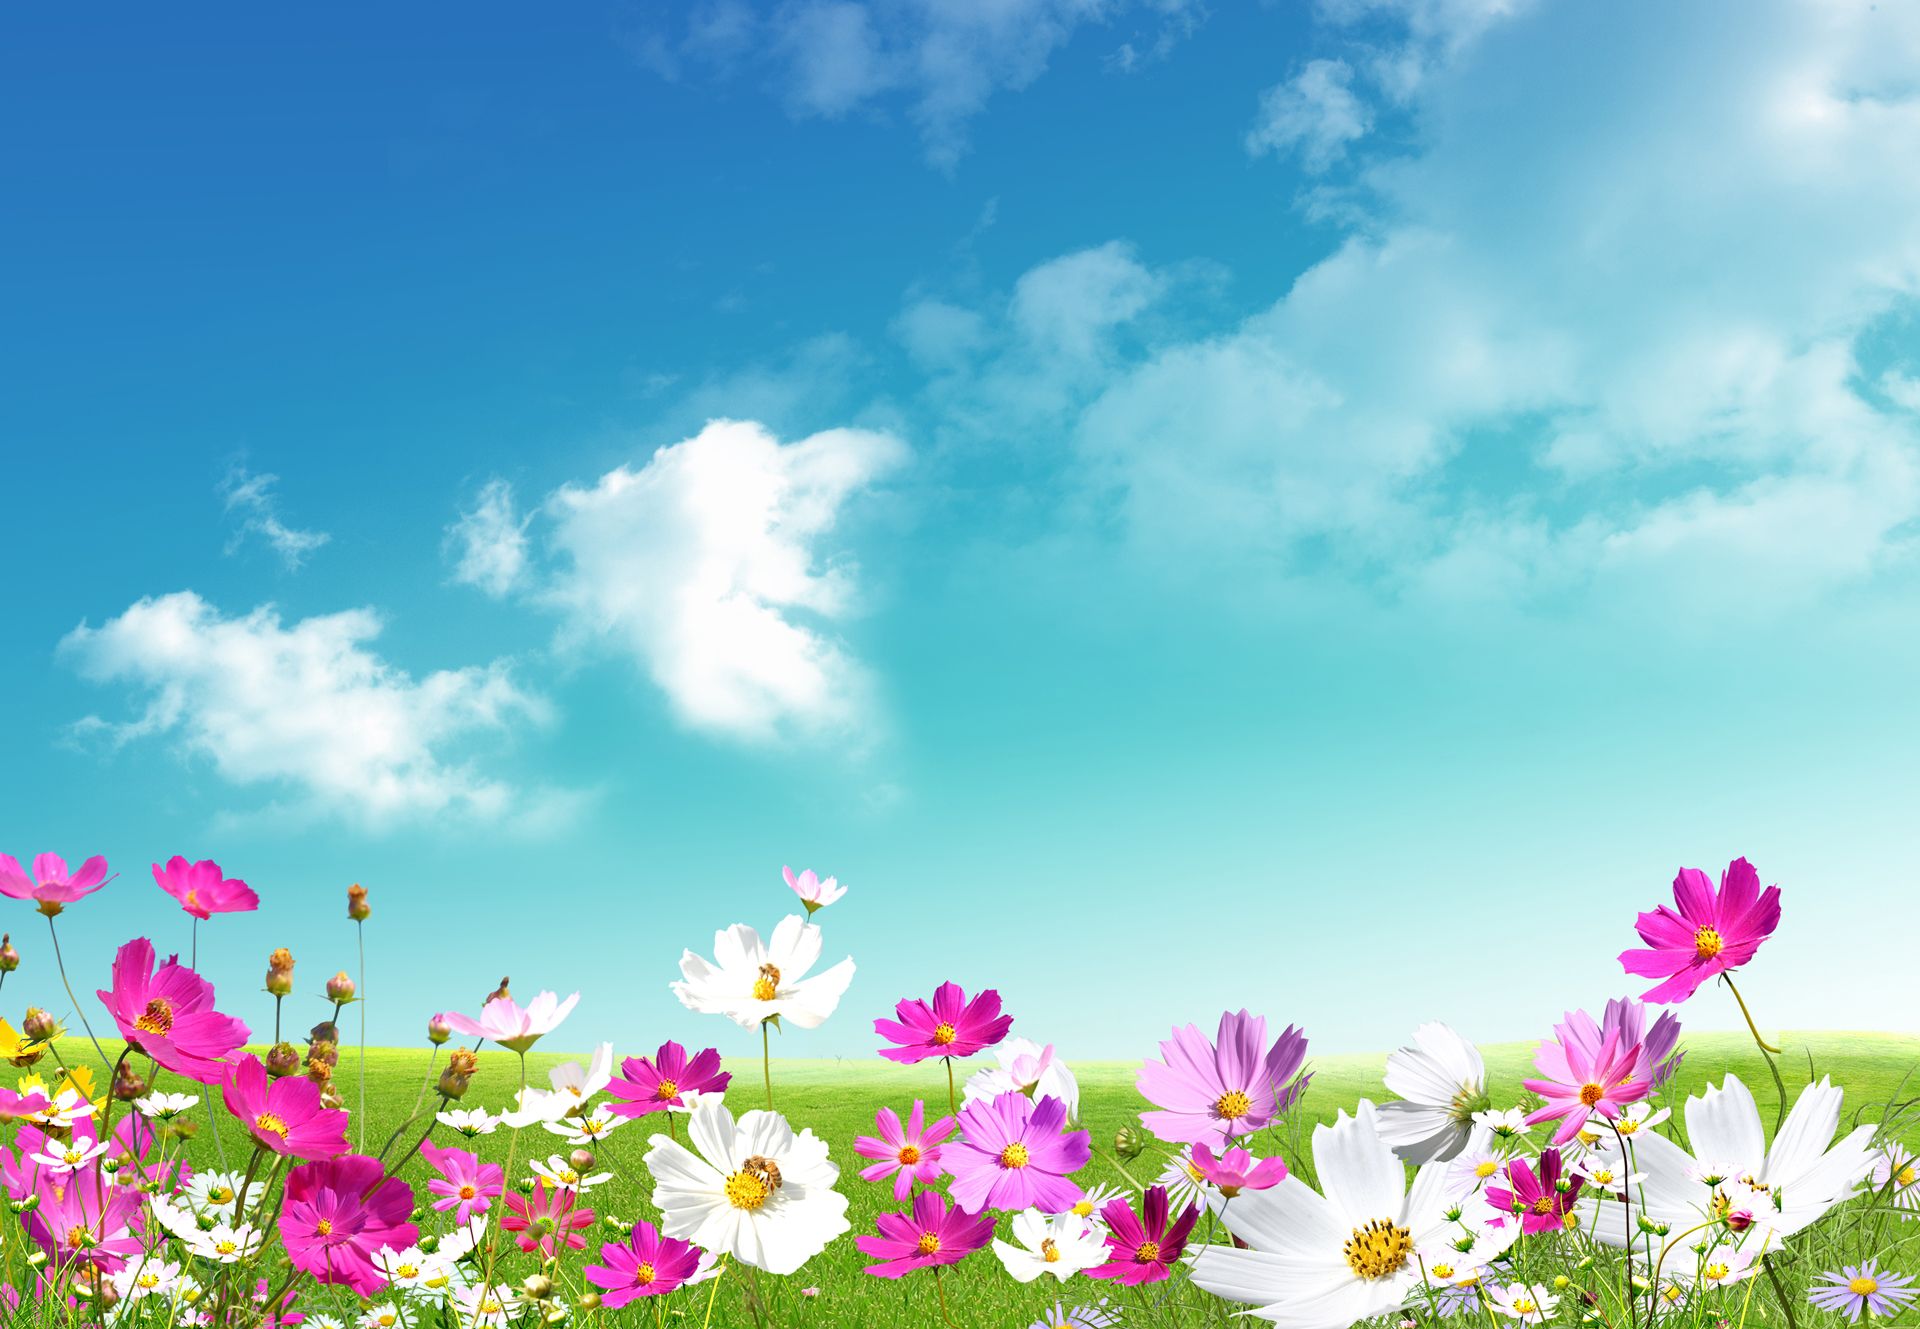 67+] Free Computer Backgrounds For Spring - WallpaperSafari